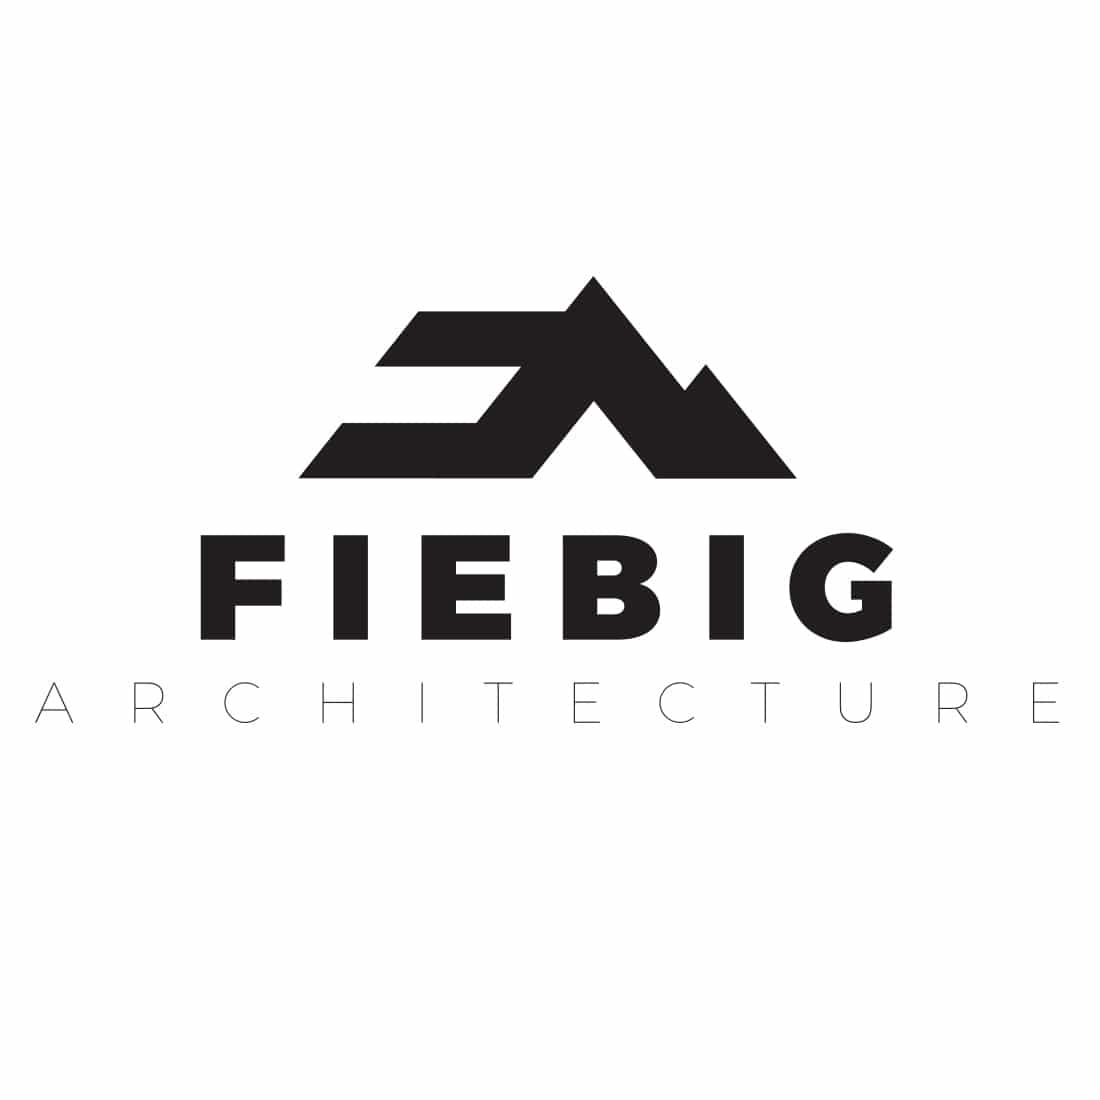 About the Fiebig Architecture Team - Fiebig Architecture